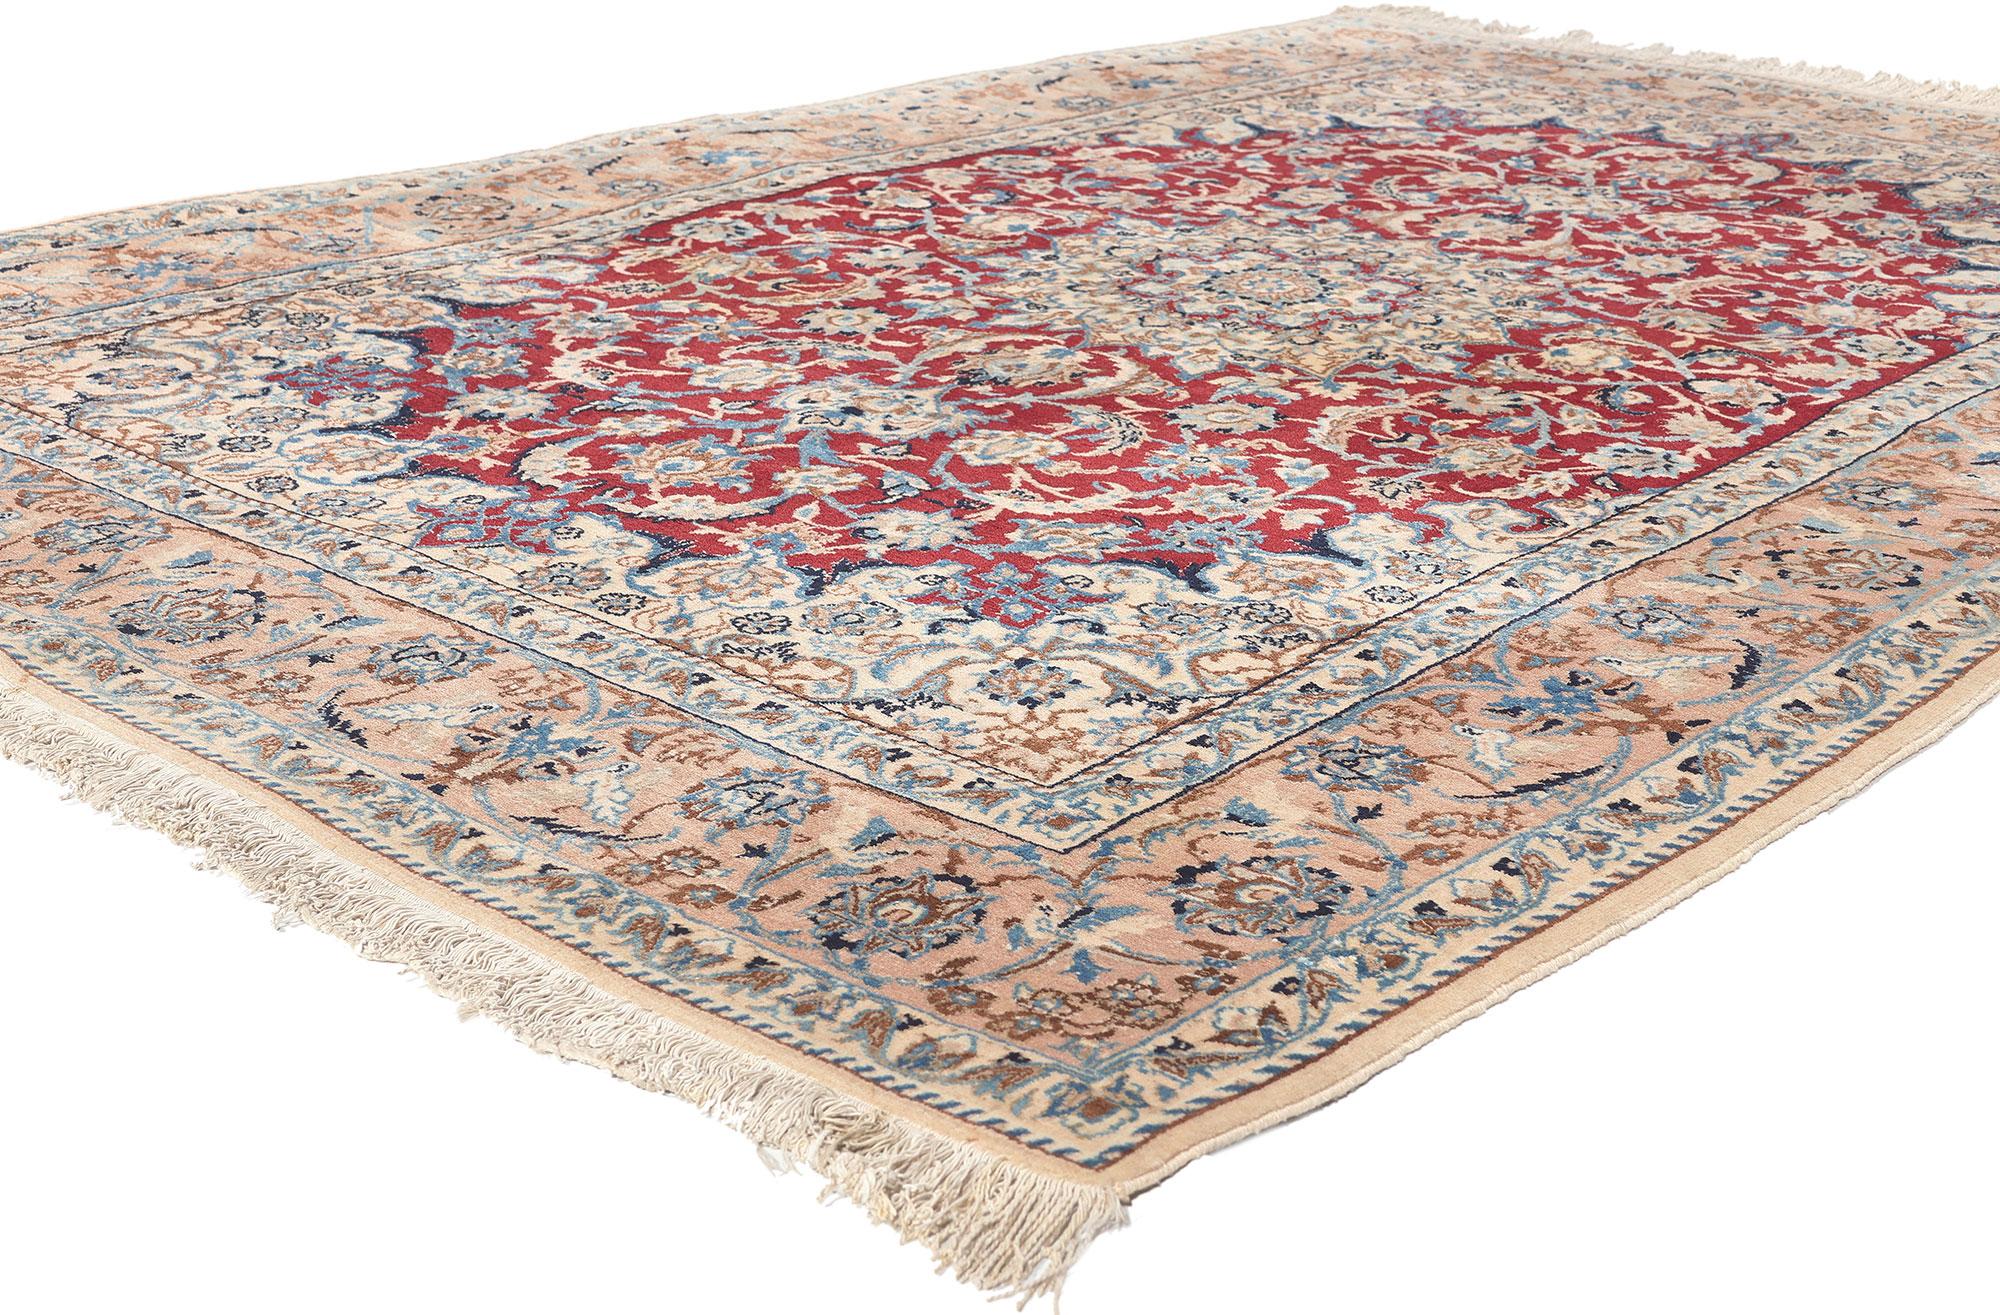 78661 Vintage Persian Nain Rug, 04'11 x 07'11.
​Admire this captivating hand knotted wool and silk vintage Persian Nain rug. Crafted with skill and imbued with enduring appeal, this vintage Persian Nain rug enchants the senses with its intricate